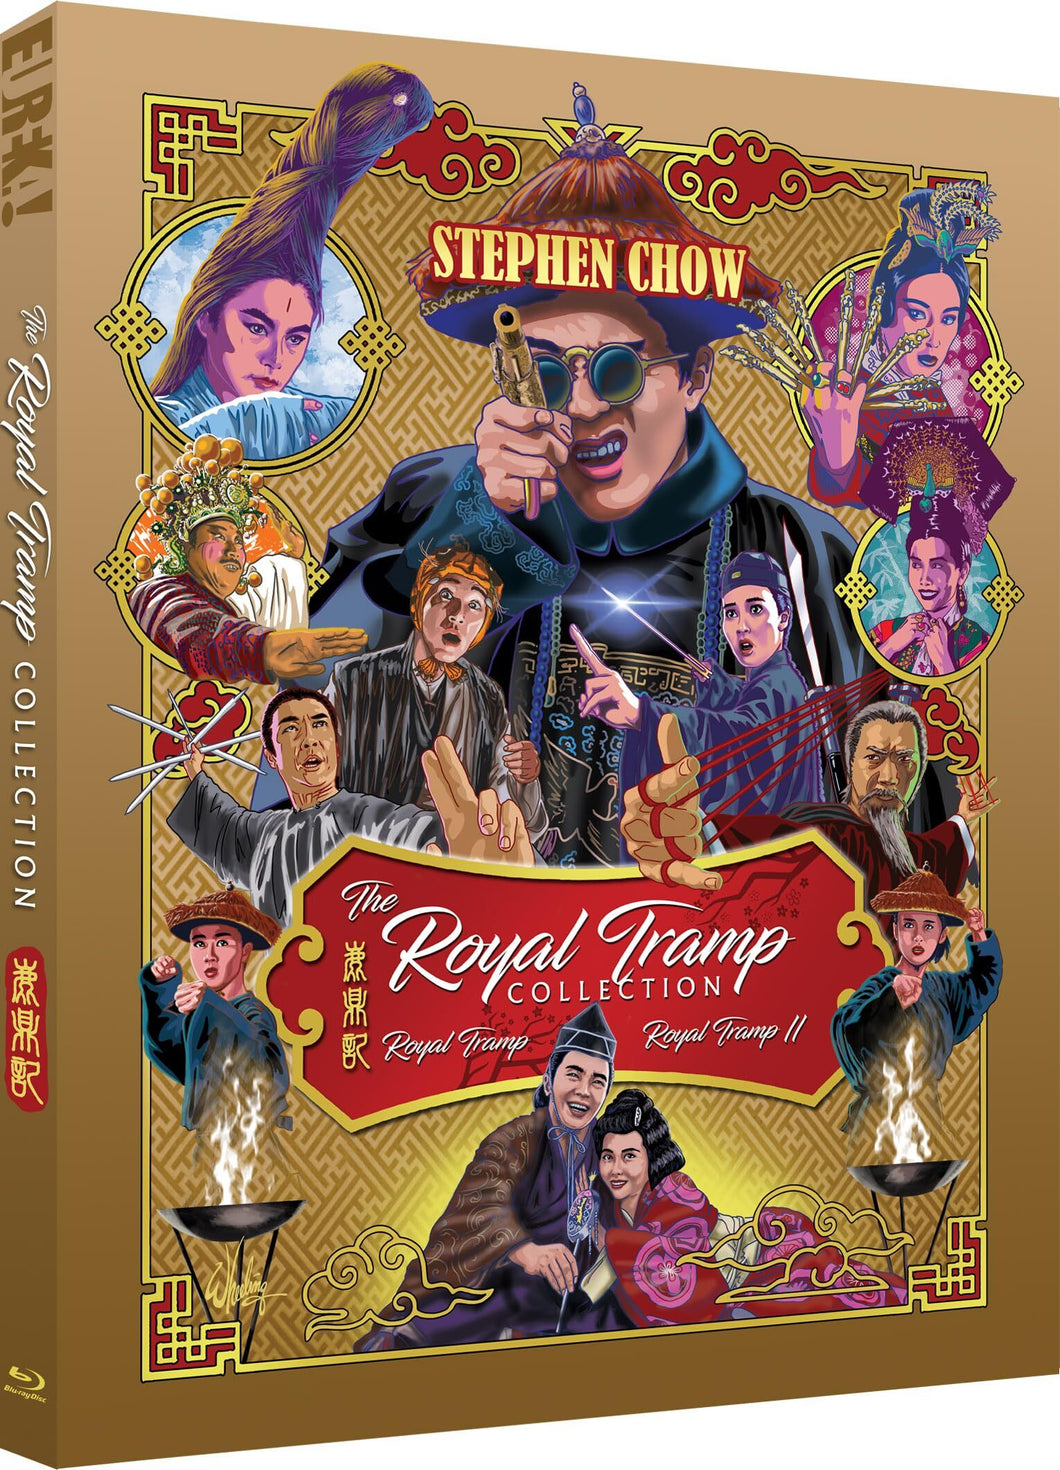  The Royal Tramp Collection (1992) - front cover